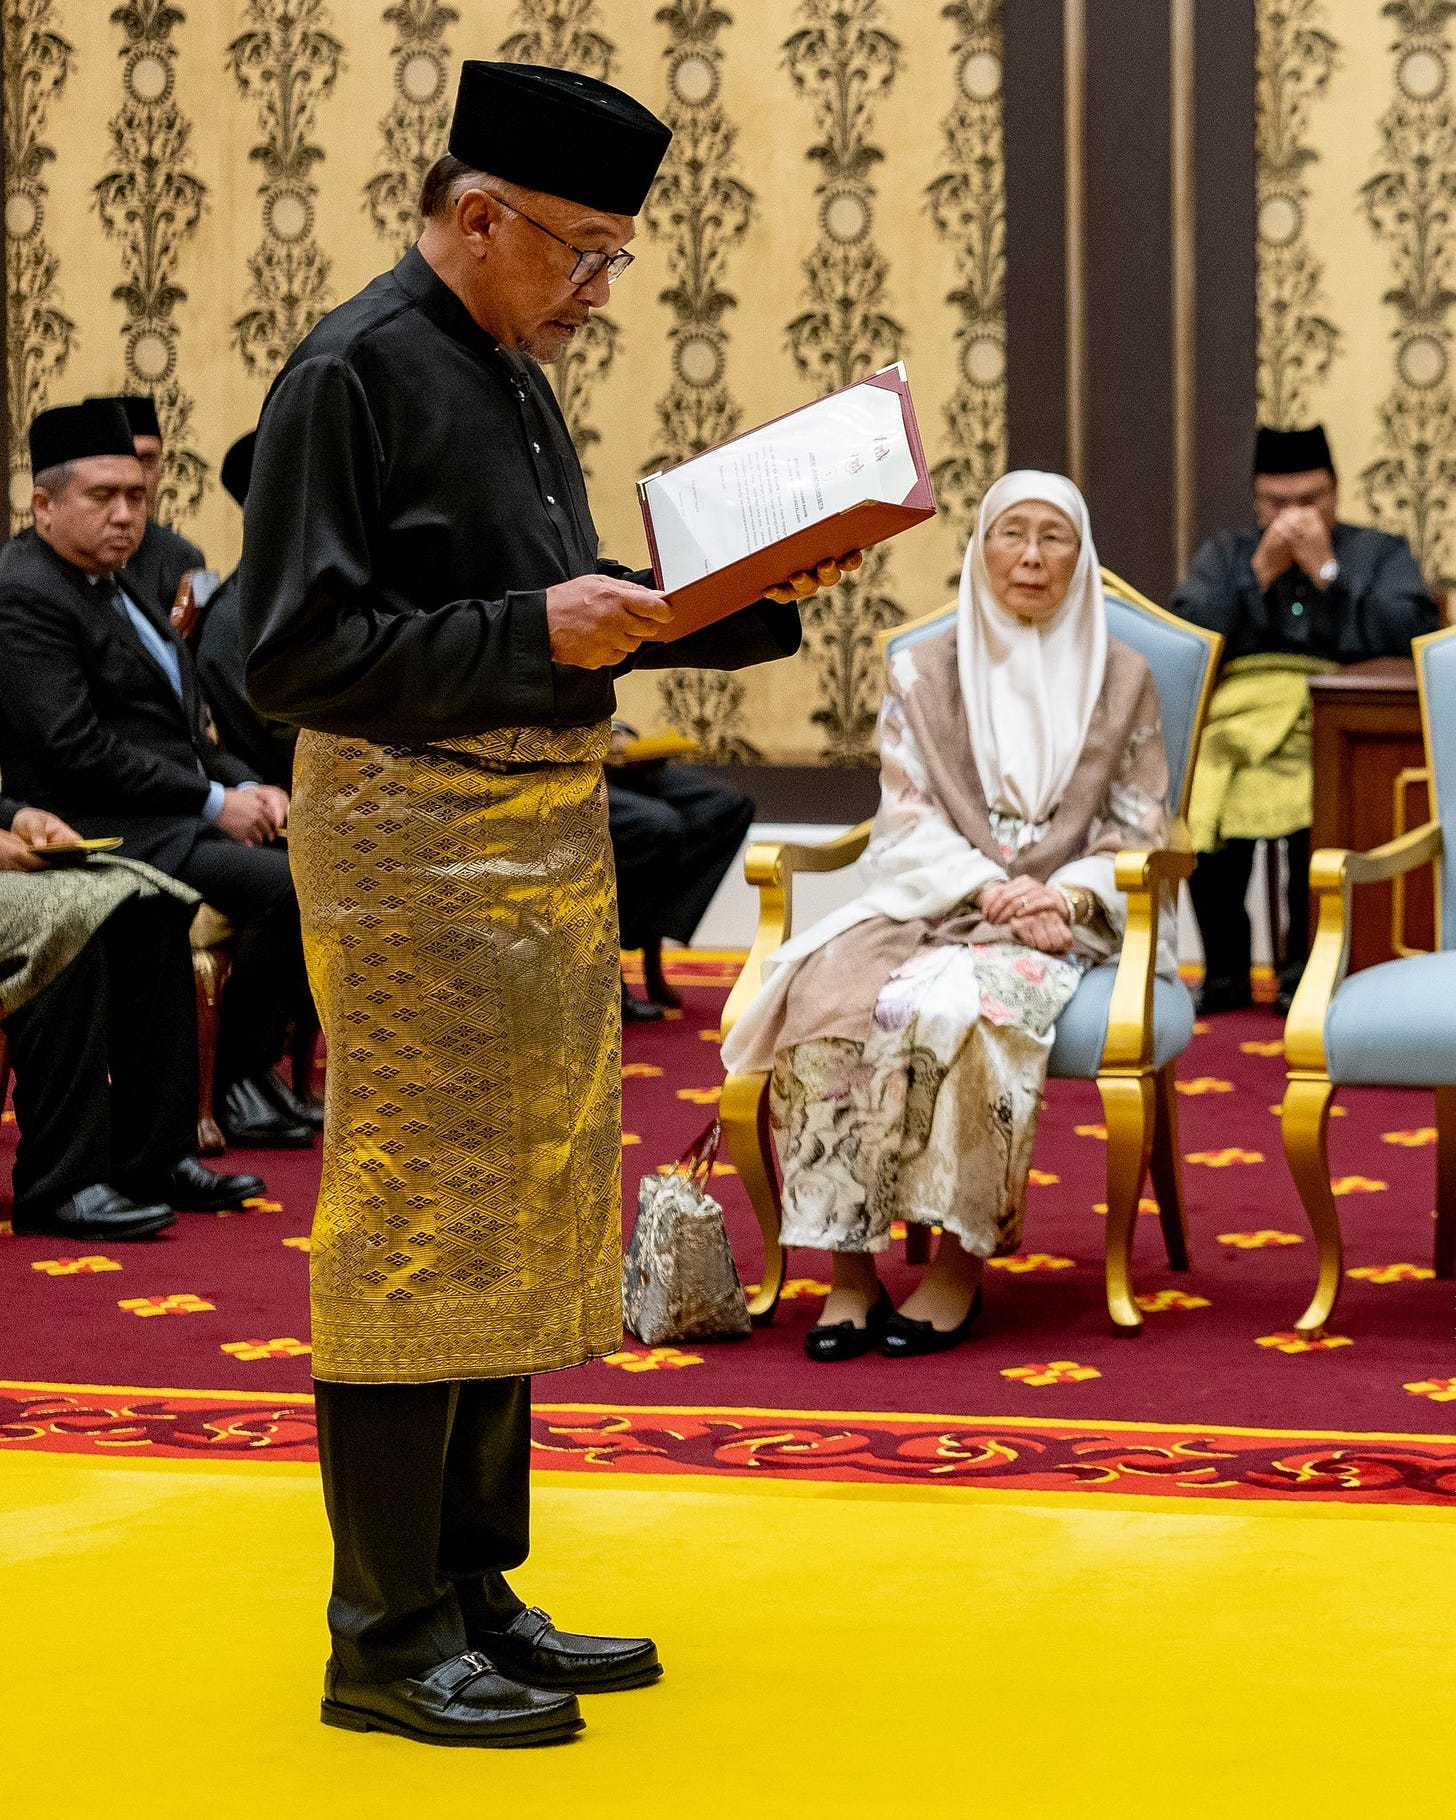 Anwar Ibrahim being sworn-in as Malaysia’s prime minister on November 24, 2022; his wife and former deputy prime minister Dr Wan Azizah Wan Ismail is seen in the background (Image: Twitter/@anwaribrahim)